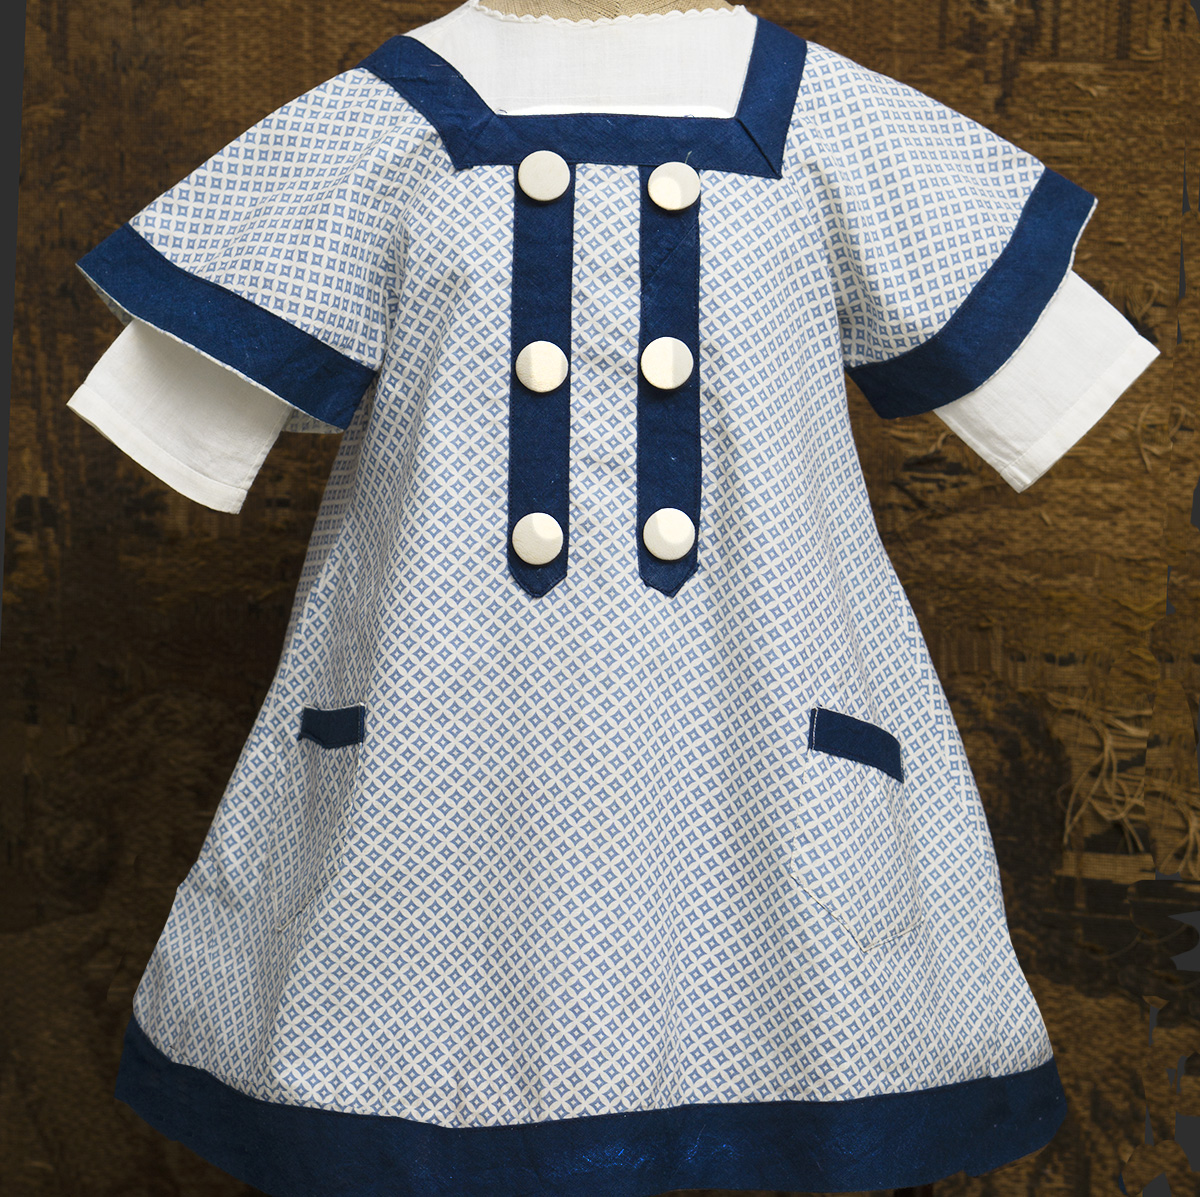 Pinafore+Blouse for doll 26-27in